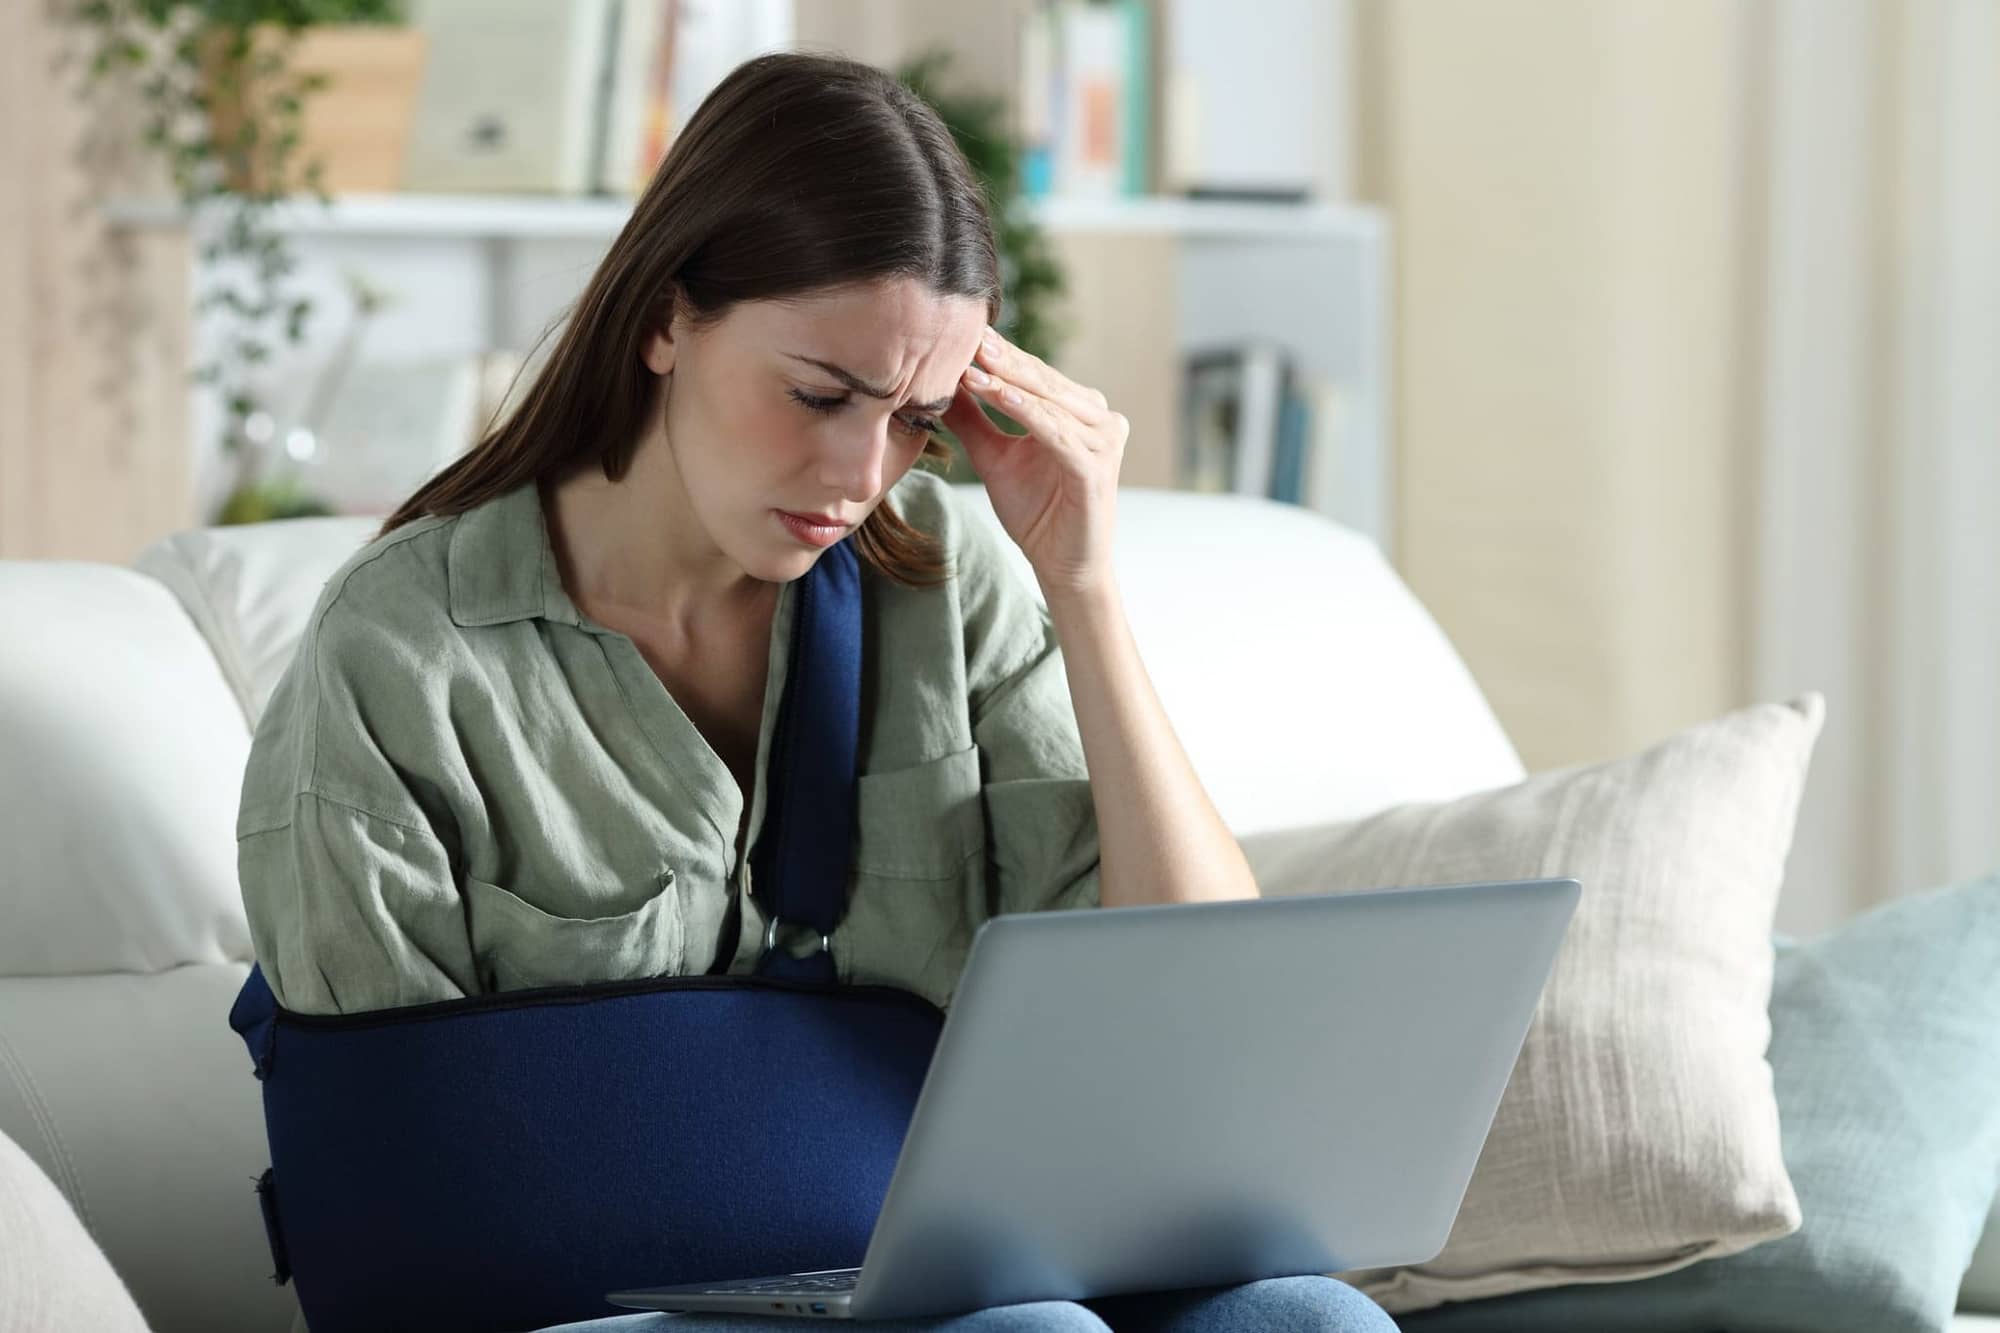 Frustrated Injured Woman Looking at Laptop